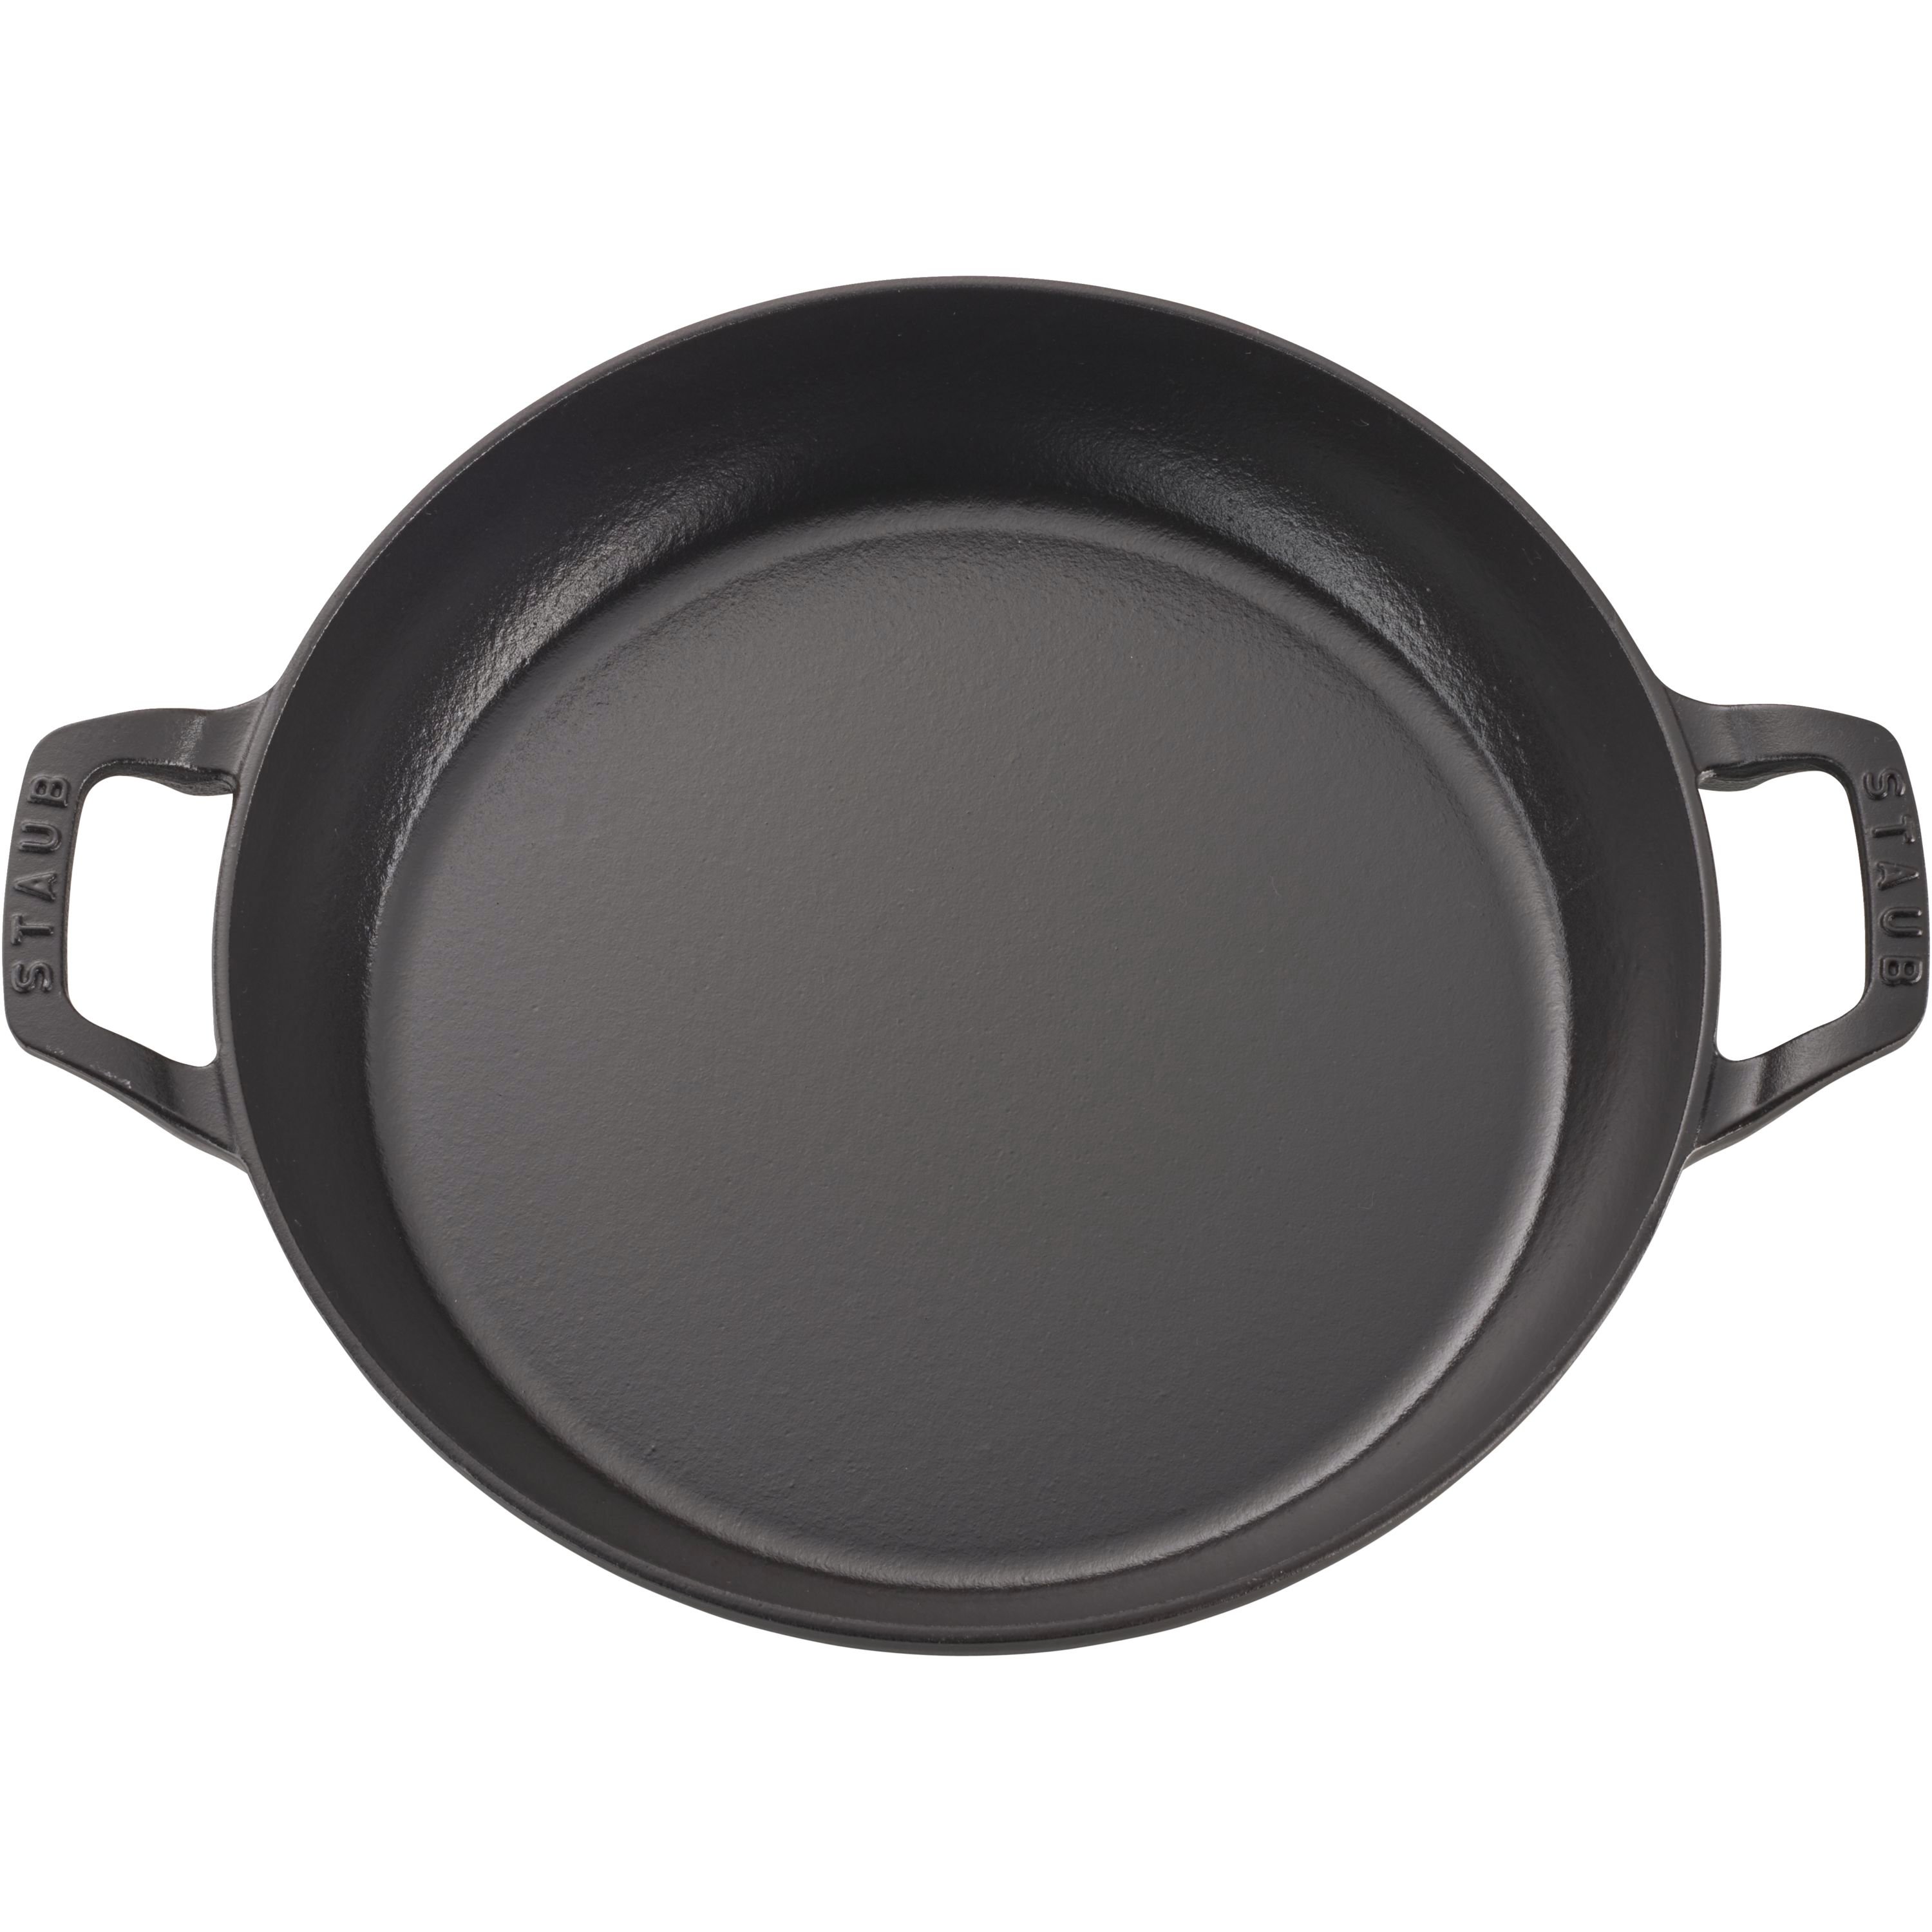 Nail those caramelized crusts with Lodge's new cast-iron bakeware